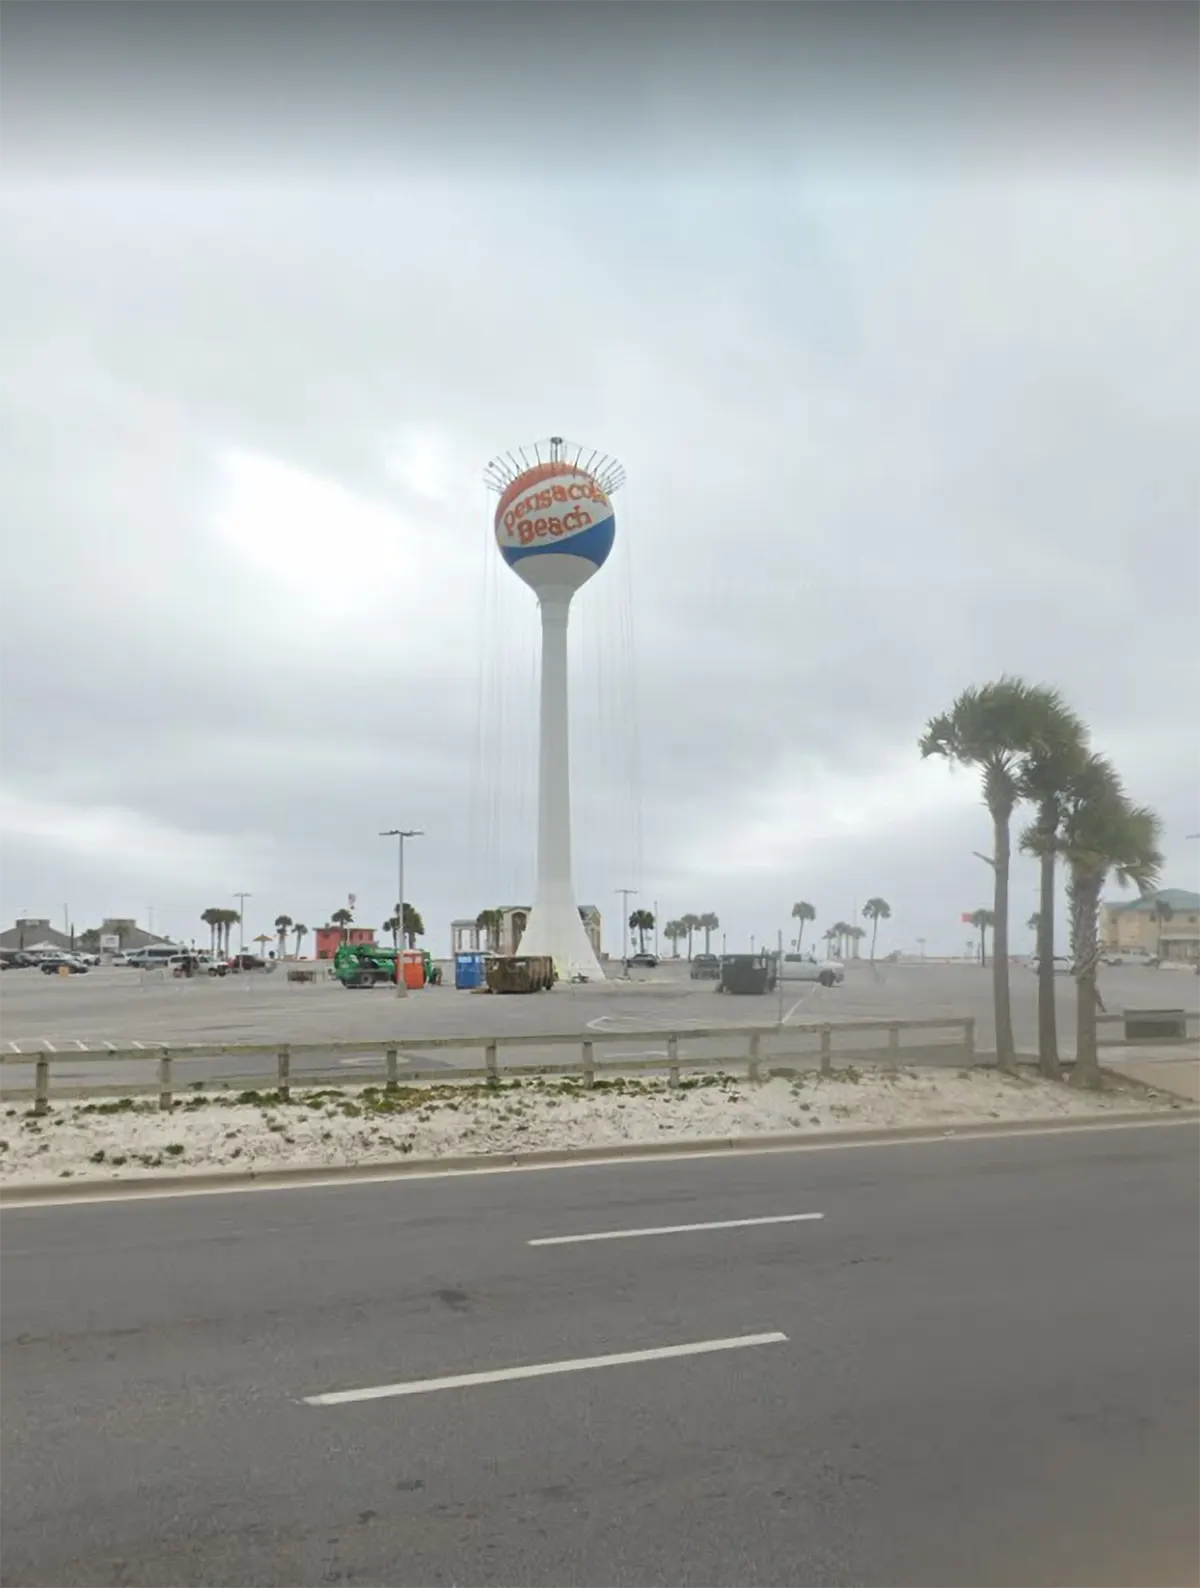 Water Tower People on a Beach | Air Conditioning Installation in Pensacola Beach | Emerald Coast Air Conditioning and Heating | AirConditioningRepairPensacola.com